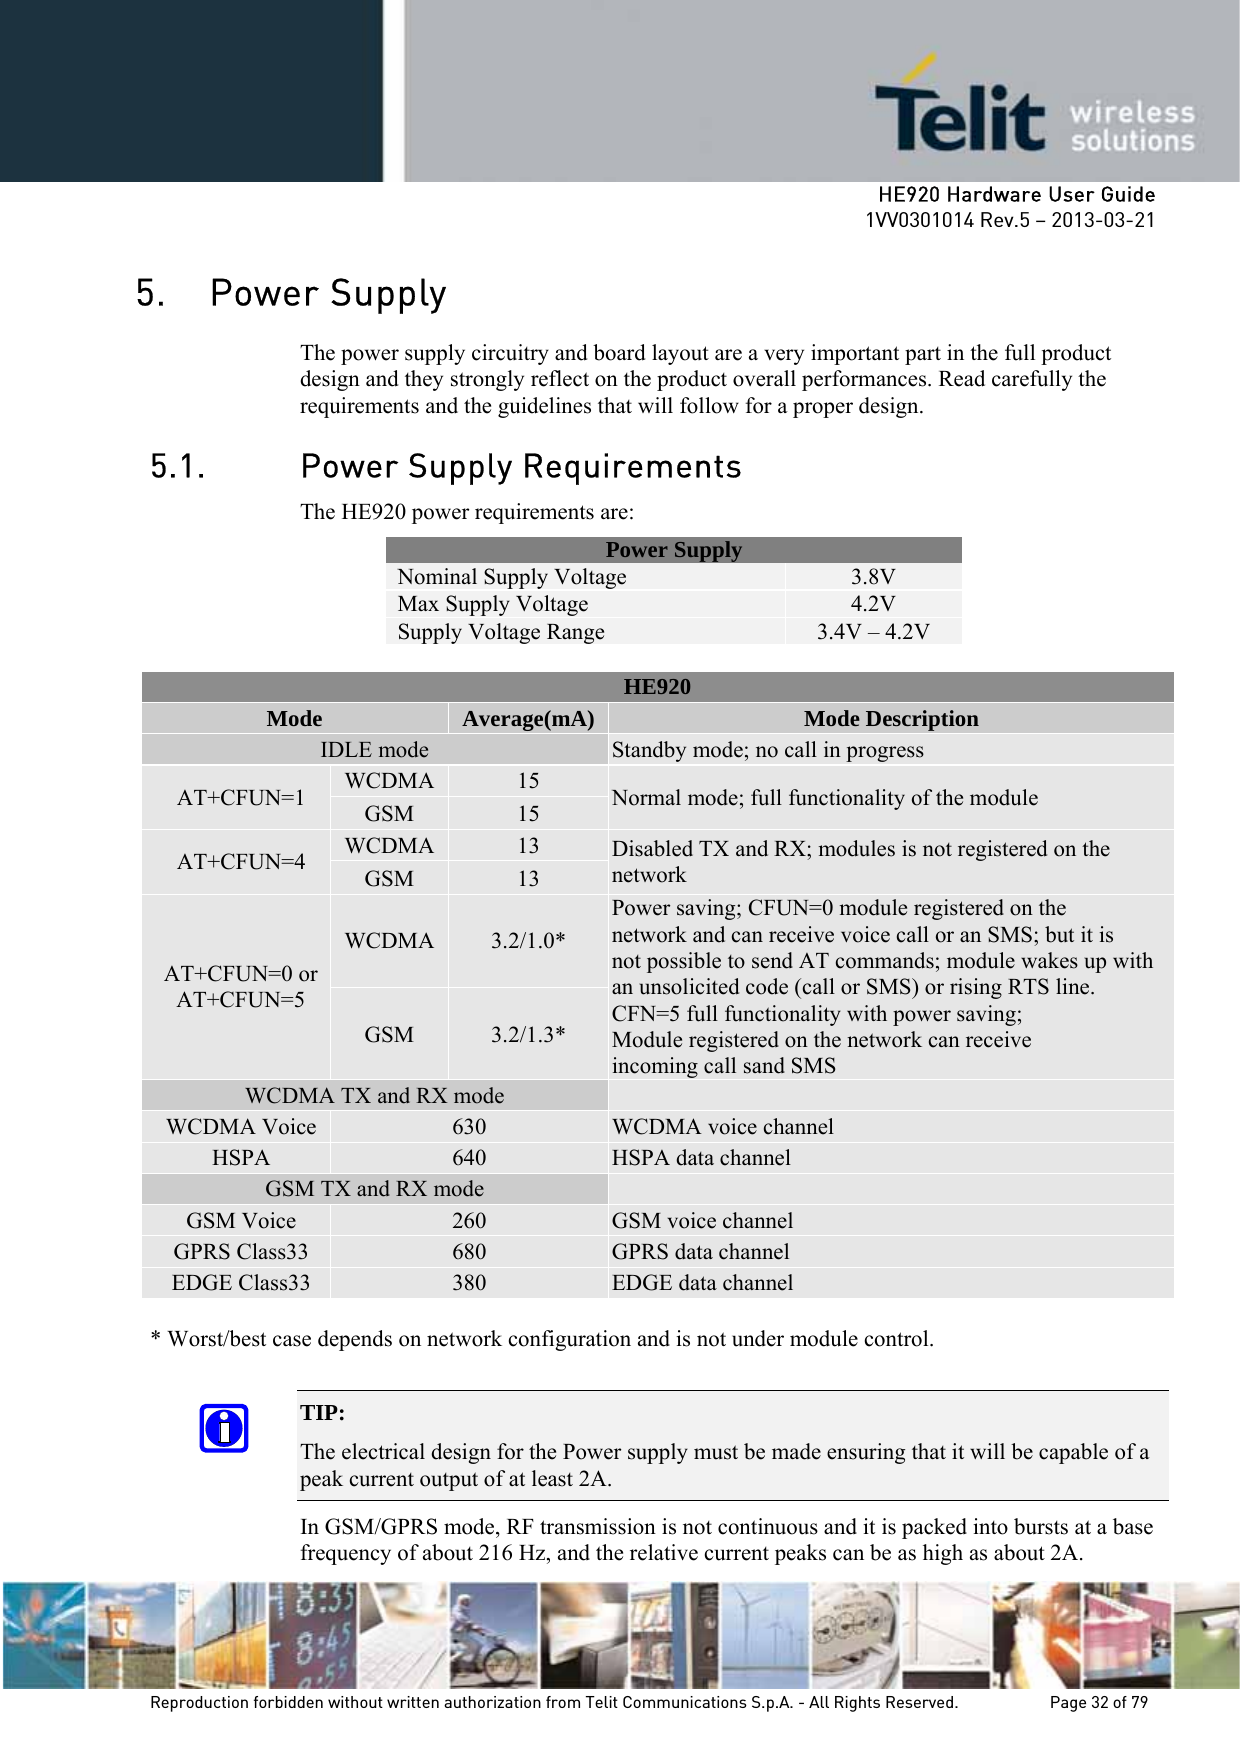     HE920 Hardware User Guide 1VV0301014 Rev.5 – 2013-03-21 Reproduction forbidden without written authorization from Telit Communications S.p.A. - All Rights Reserved.    Page 32 of 79  5. Power Supply The power supply circuitry and board layout are a very important part in the full product design and they strongly reflect on the product overall performances. Read carefully the requirements and the guidelines that will follow for a proper design. 5.1. Power Supply Requirements The HE920 power requirements are: Power Supply Nominal Supply Voltage  3.8V Max Supply Voltage  4.2V Supply Voltage Range  3.4V – 4.2V  HE920 Mode  Average(mA) Mode Description IDLE mode  Standby mode; no call in progress AT+CFUN=1  WCDMA  15  Normal mode; full functionality of the module GSM  15 AT+CFUN=4  WCDMA  13  Disabled TX and RX; modules is not registered on the network GSM  13 AT+CFUN=0 or AT+CFUN=5 WCDMA  3.2/1.0* Power saving; CFUN=0 module registered on the network and can receive voice call or an SMS; but it is not possible to send AT commands; module wakes up with an unsolicited code (call or SMS) or rising RTS line. CFN=5 full functionality with power saving; Module registered on the network can receive  incoming call sand SMS GSM  3.2/1.3* WCDMA TX and RX mode   WCDMA Voice  630  WCDMA voice channel HSPA  640  HSPA data channel  GSM TX and RX mode   GSM Voice  260  GSM voice channel GPRS Class33  680  GPRS data channel EDGE Class33  380  EDGE data channel  * Worst/best case depends on network configuration and is not under module control.  TIP:  The electrical design for the Power supply must be made ensuring that it will be capable of a peak current output of at least 2A. In GSM/GPRS mode, RF transmission is not continuous and it is packed into bursts at a base frequency of about 216 Hz, and the relative current peaks can be as high as about 2A. 